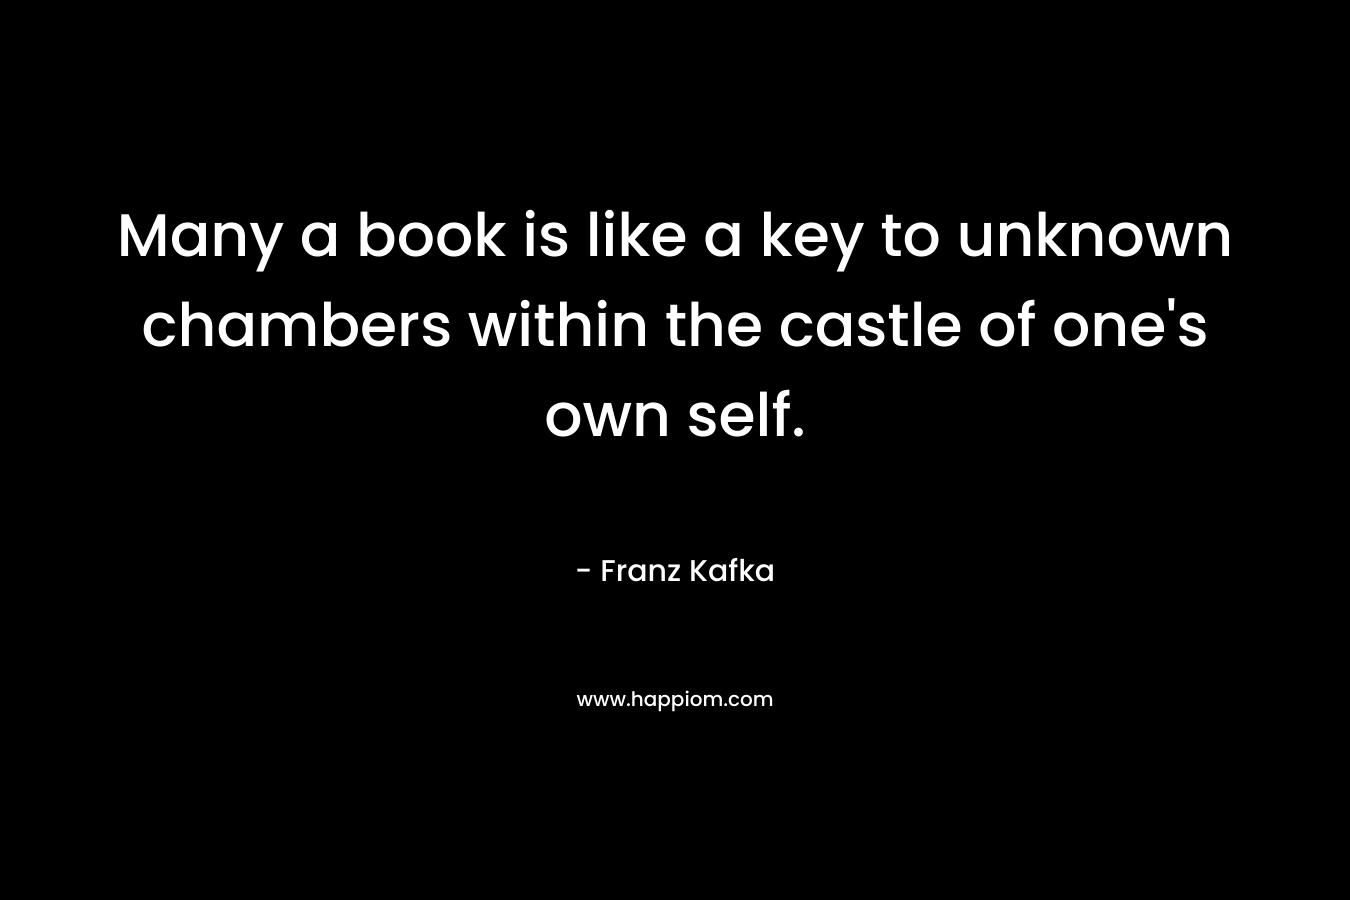 Many a book is like a key to unknown chambers within the castle of one’s own self. – Franz Kafka